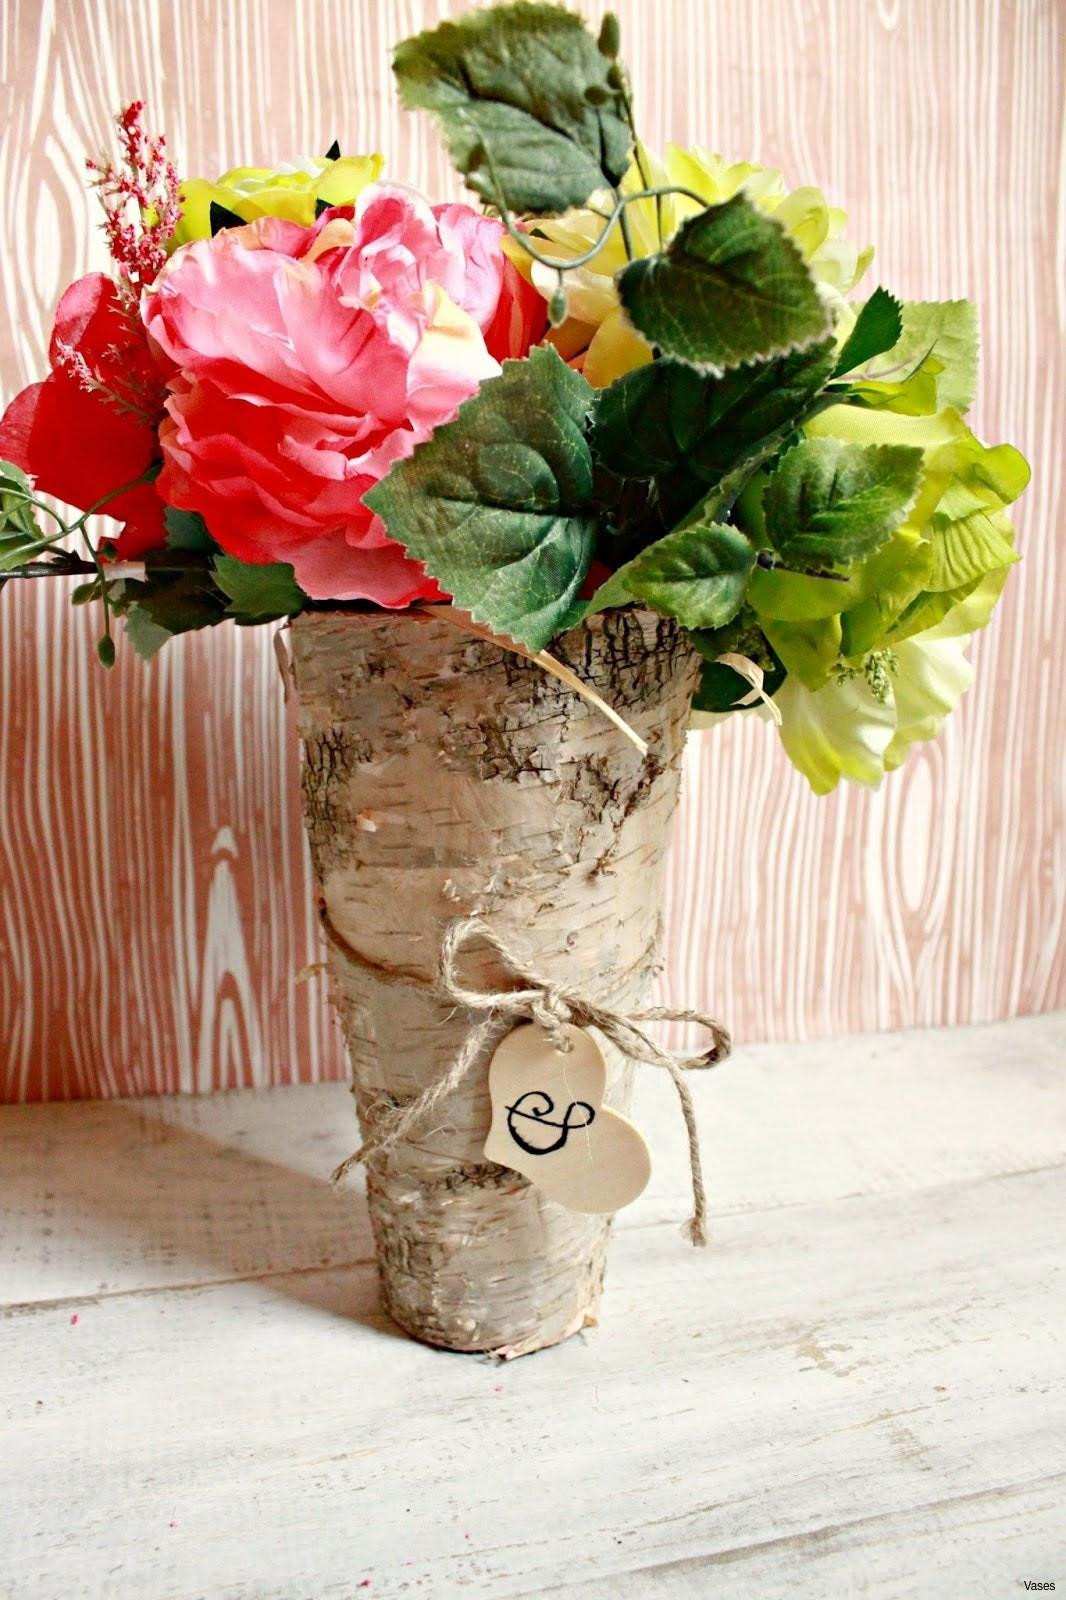 12 Perfect Hurricane Vases for Centerpieces 2023 free download hurricane vases for centerpieces of more diy wedding ideas on a budget amazing design economyinnbeebe com throughout flowers and decorations for weddings h vases diy wood vase i 0d base insp